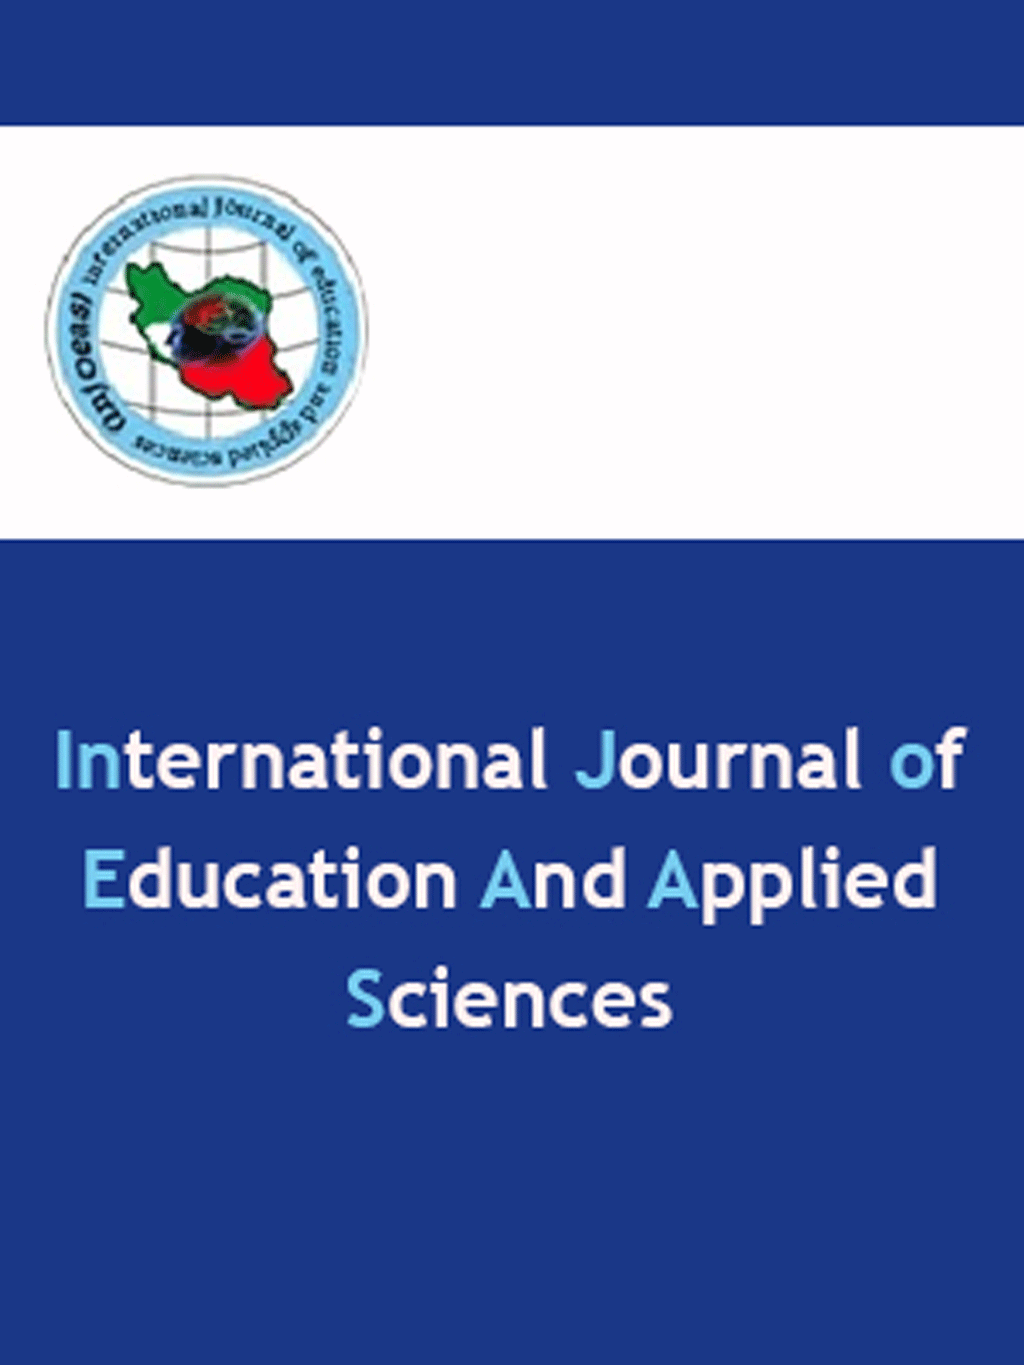 Education and Applied Sciences - January 2021, Volume 1 - Number 4